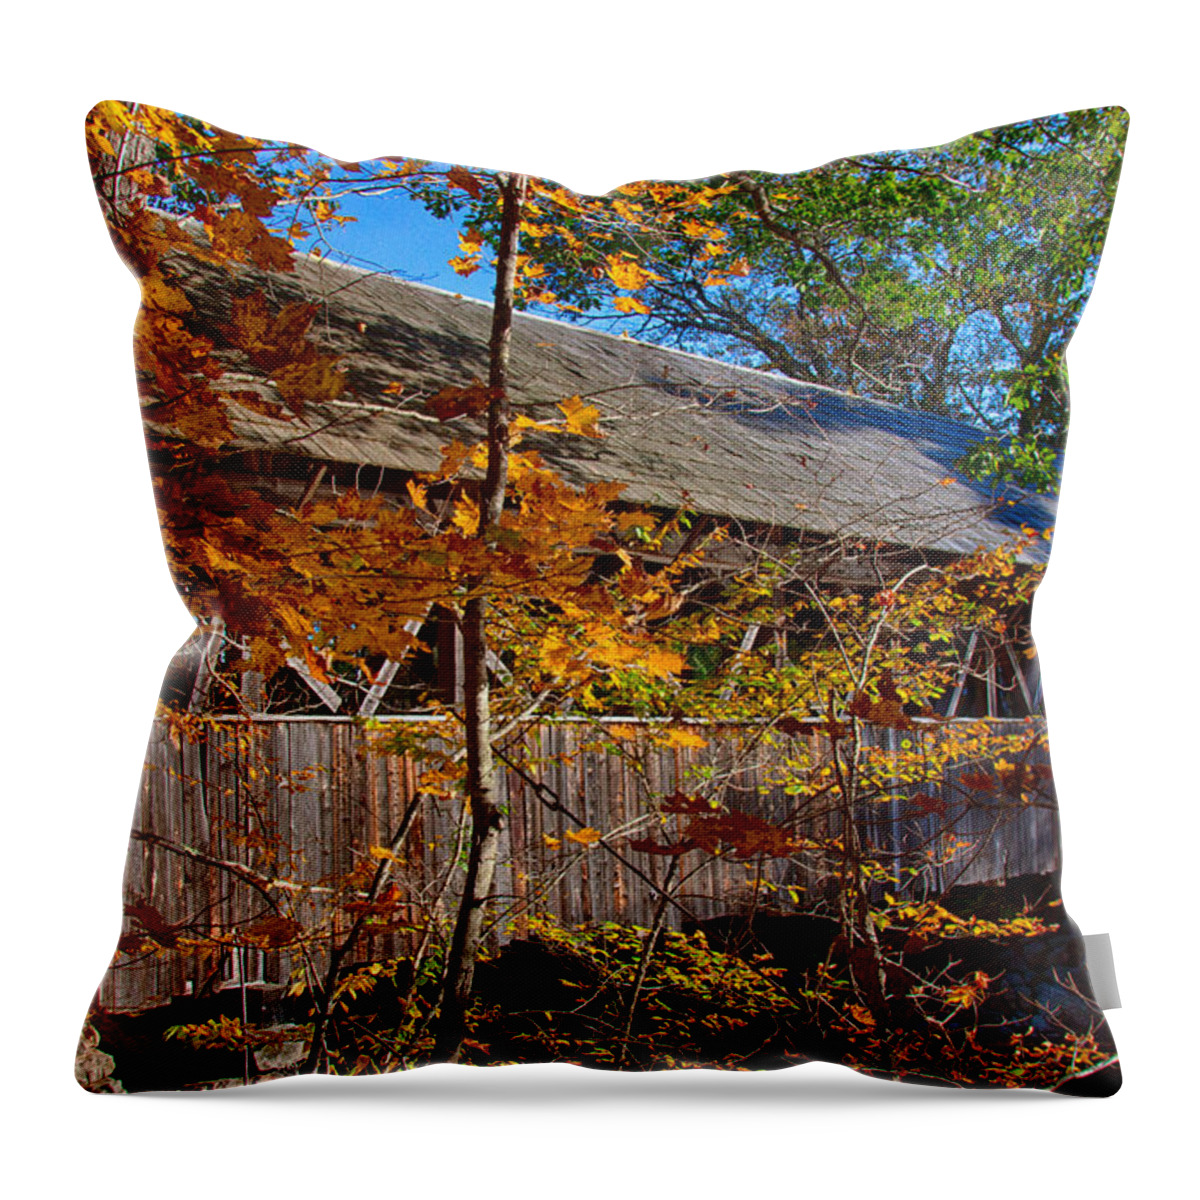 Artist Covered Bridge Throw Pillow featuring the photograph Sunday River Covered Bridge #3 by Jeff Folger